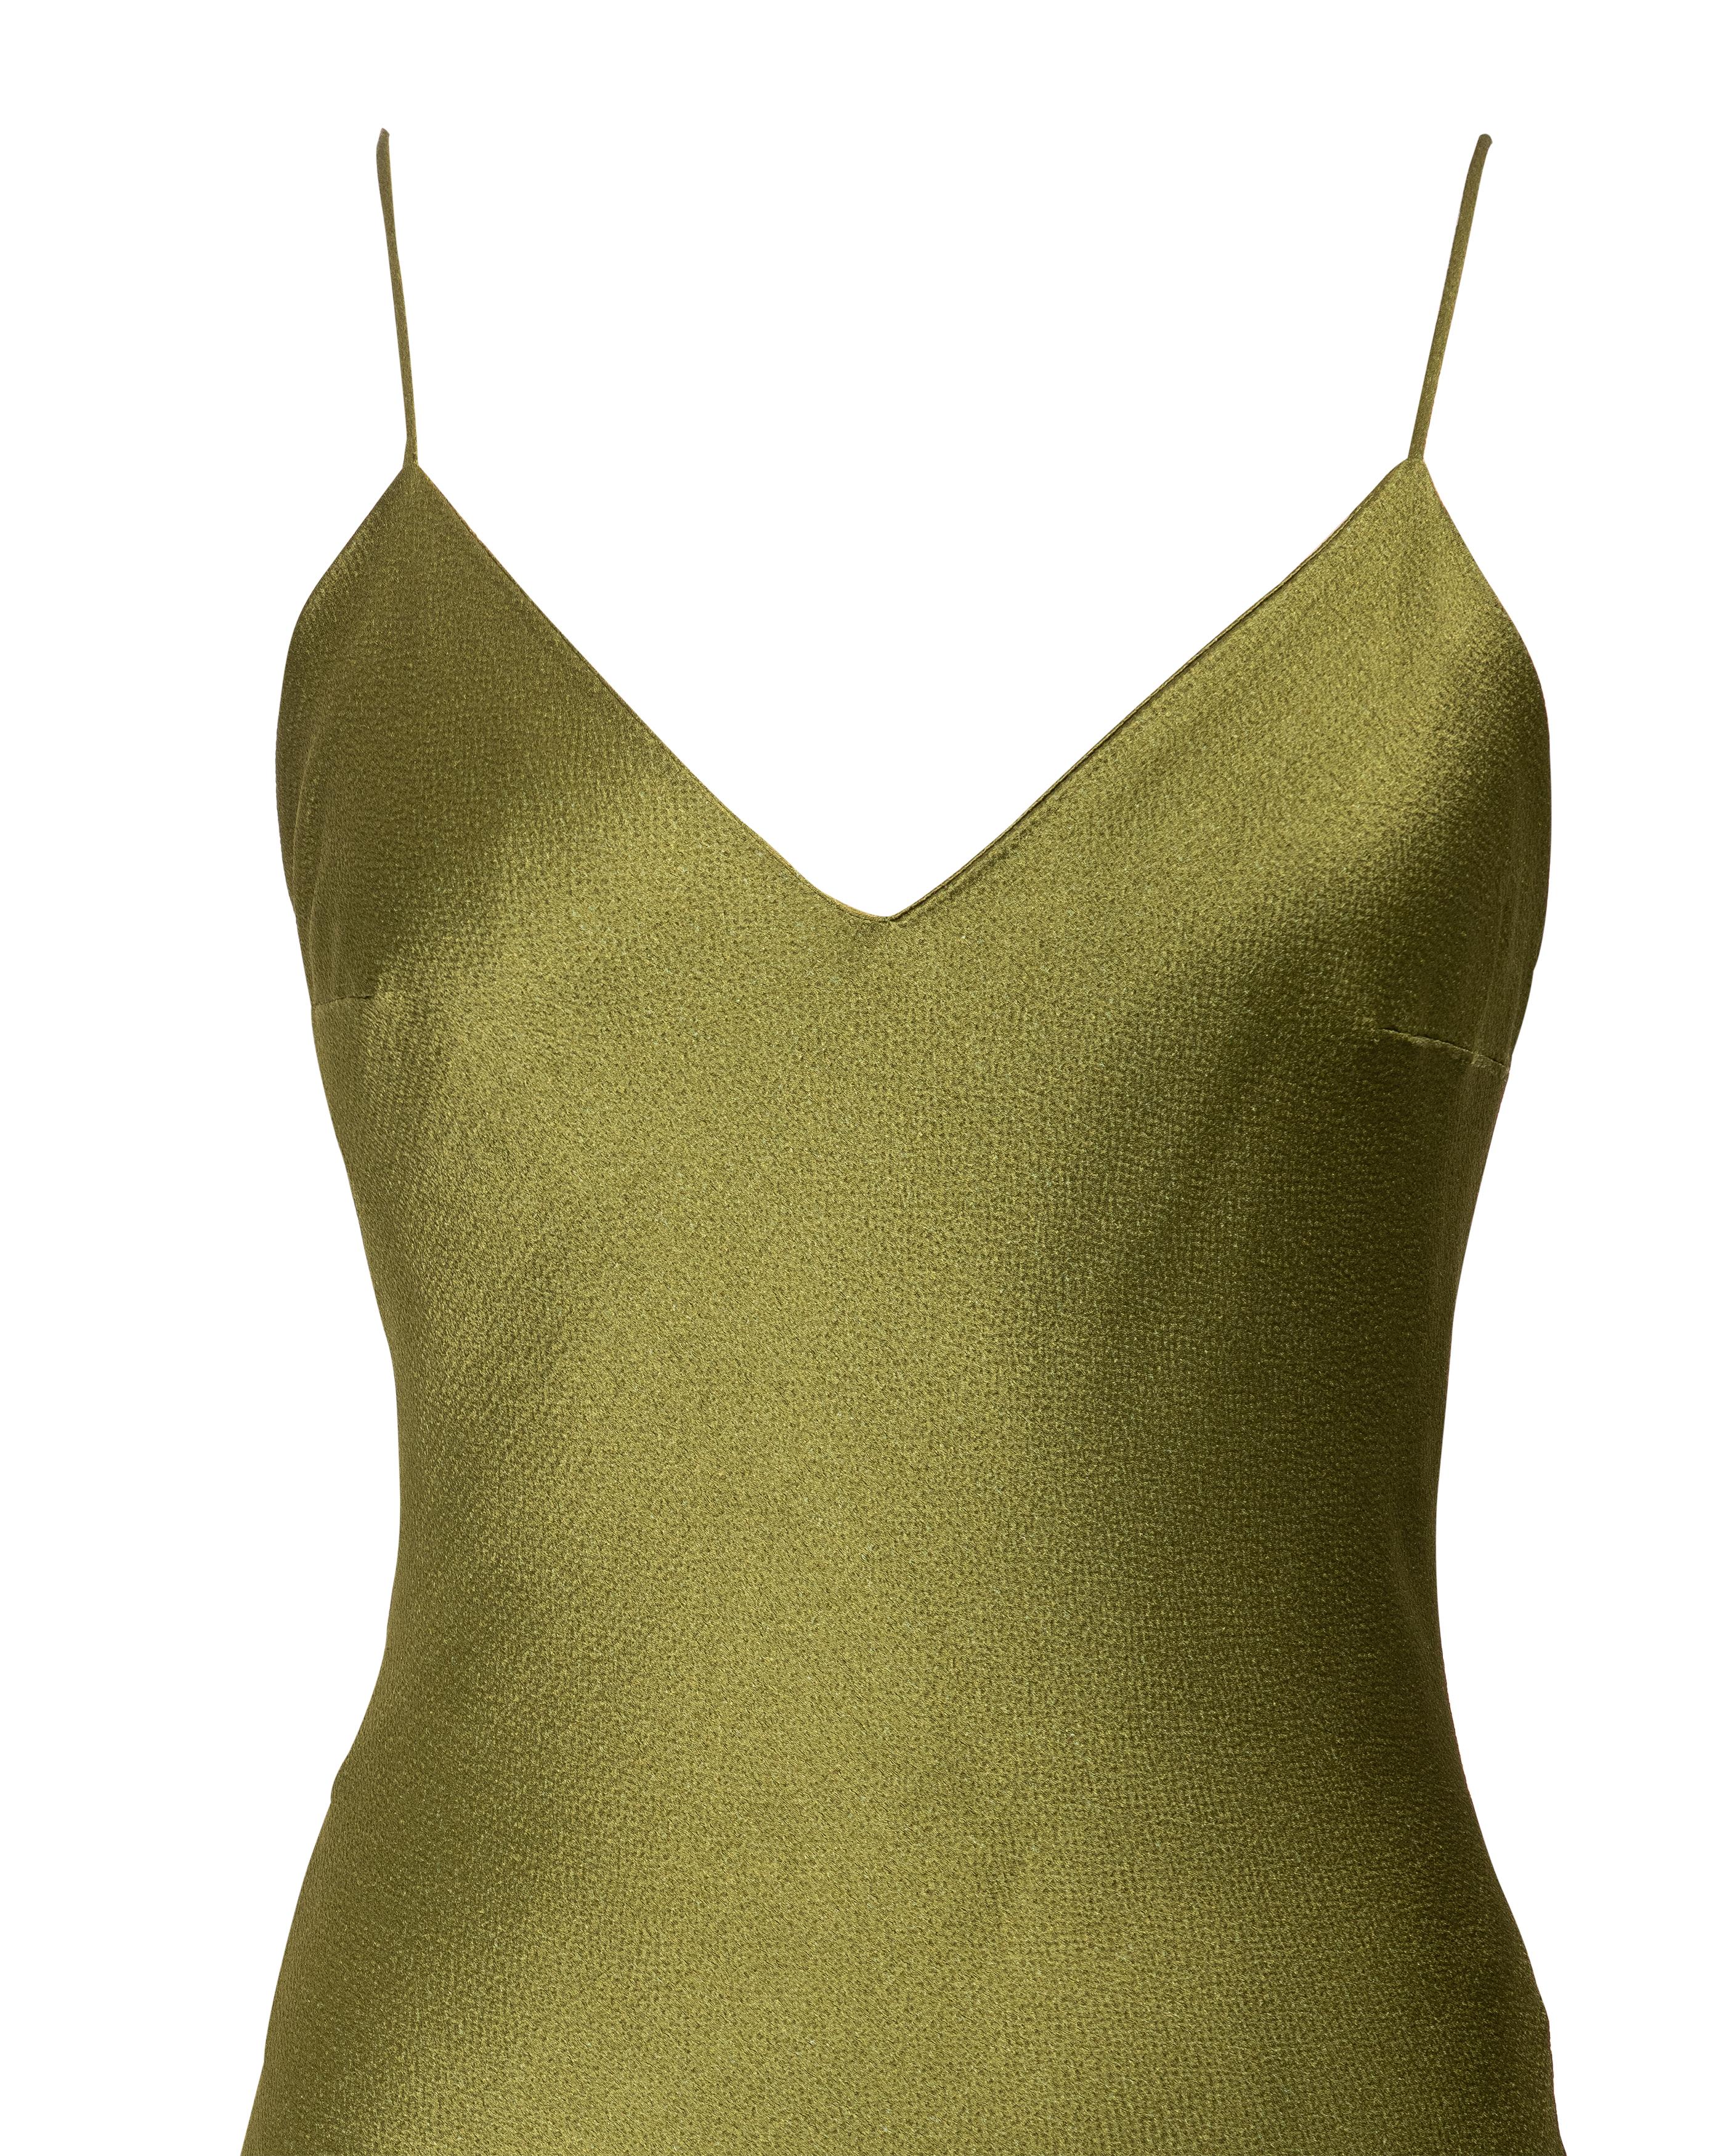 S/S 1999 Christian Dior by John Galliano Olive Green Bias Cut Slip Gown For Sale 3